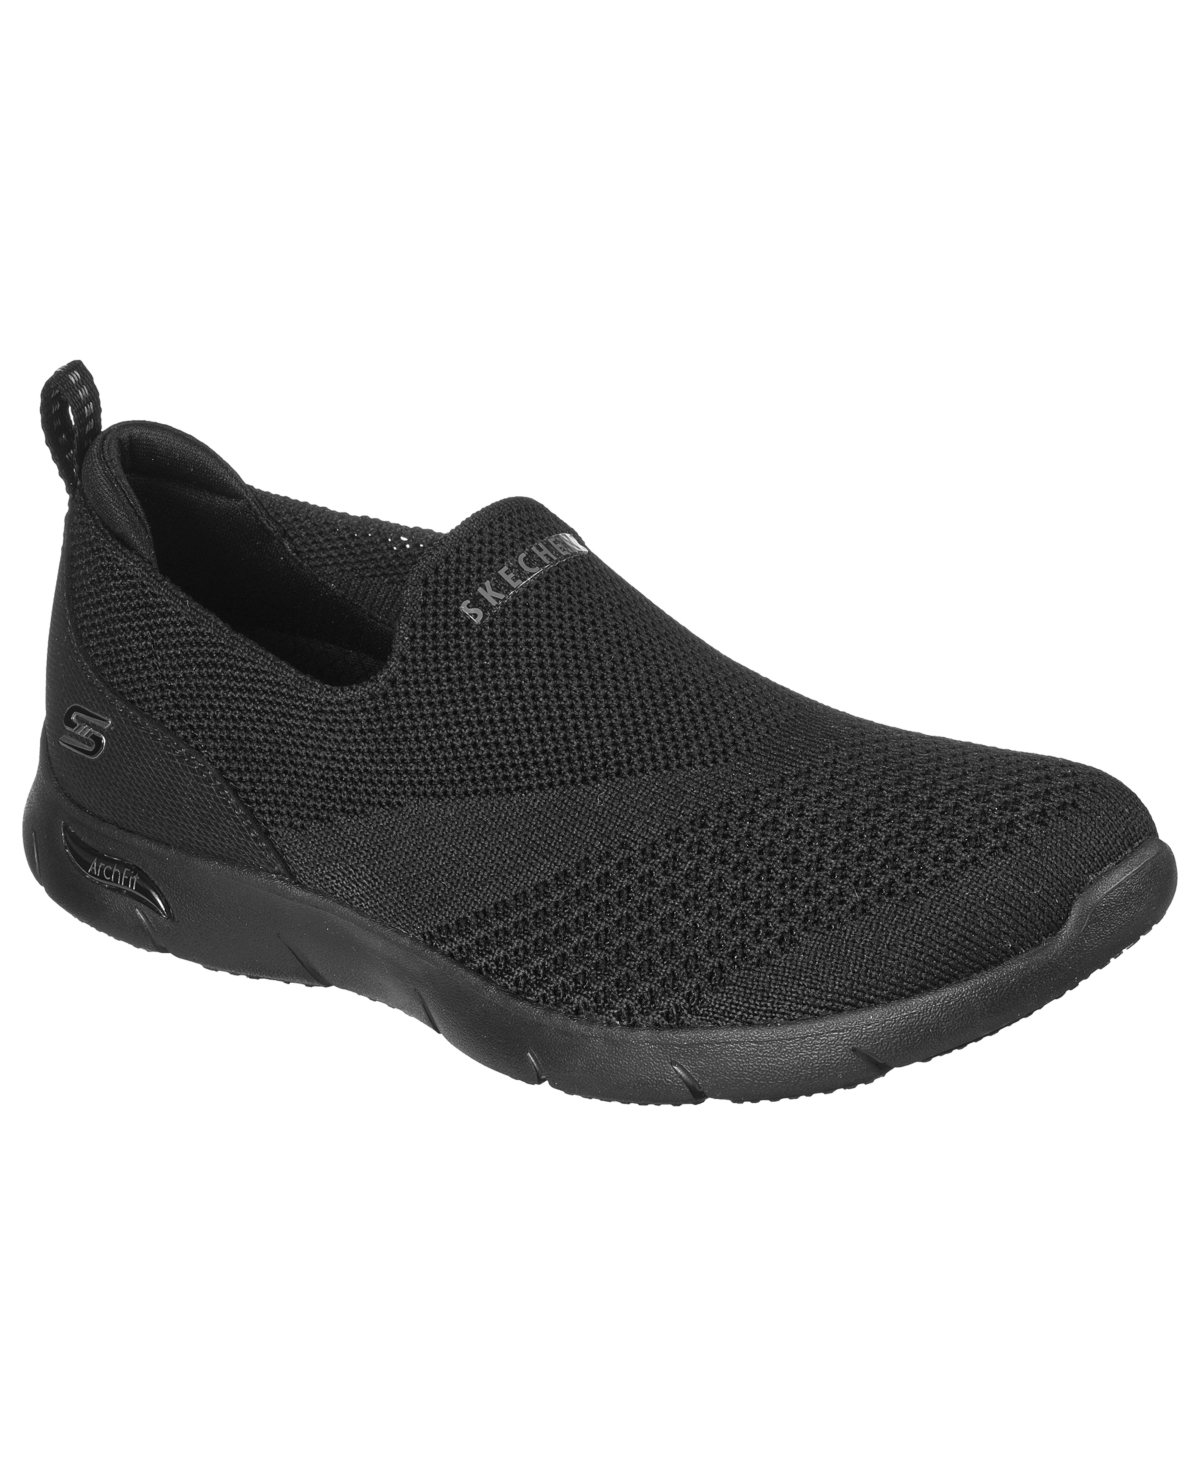 Skechers Women's Arch Fit Arch Support Uplift - Precious Slip-On Casual ...